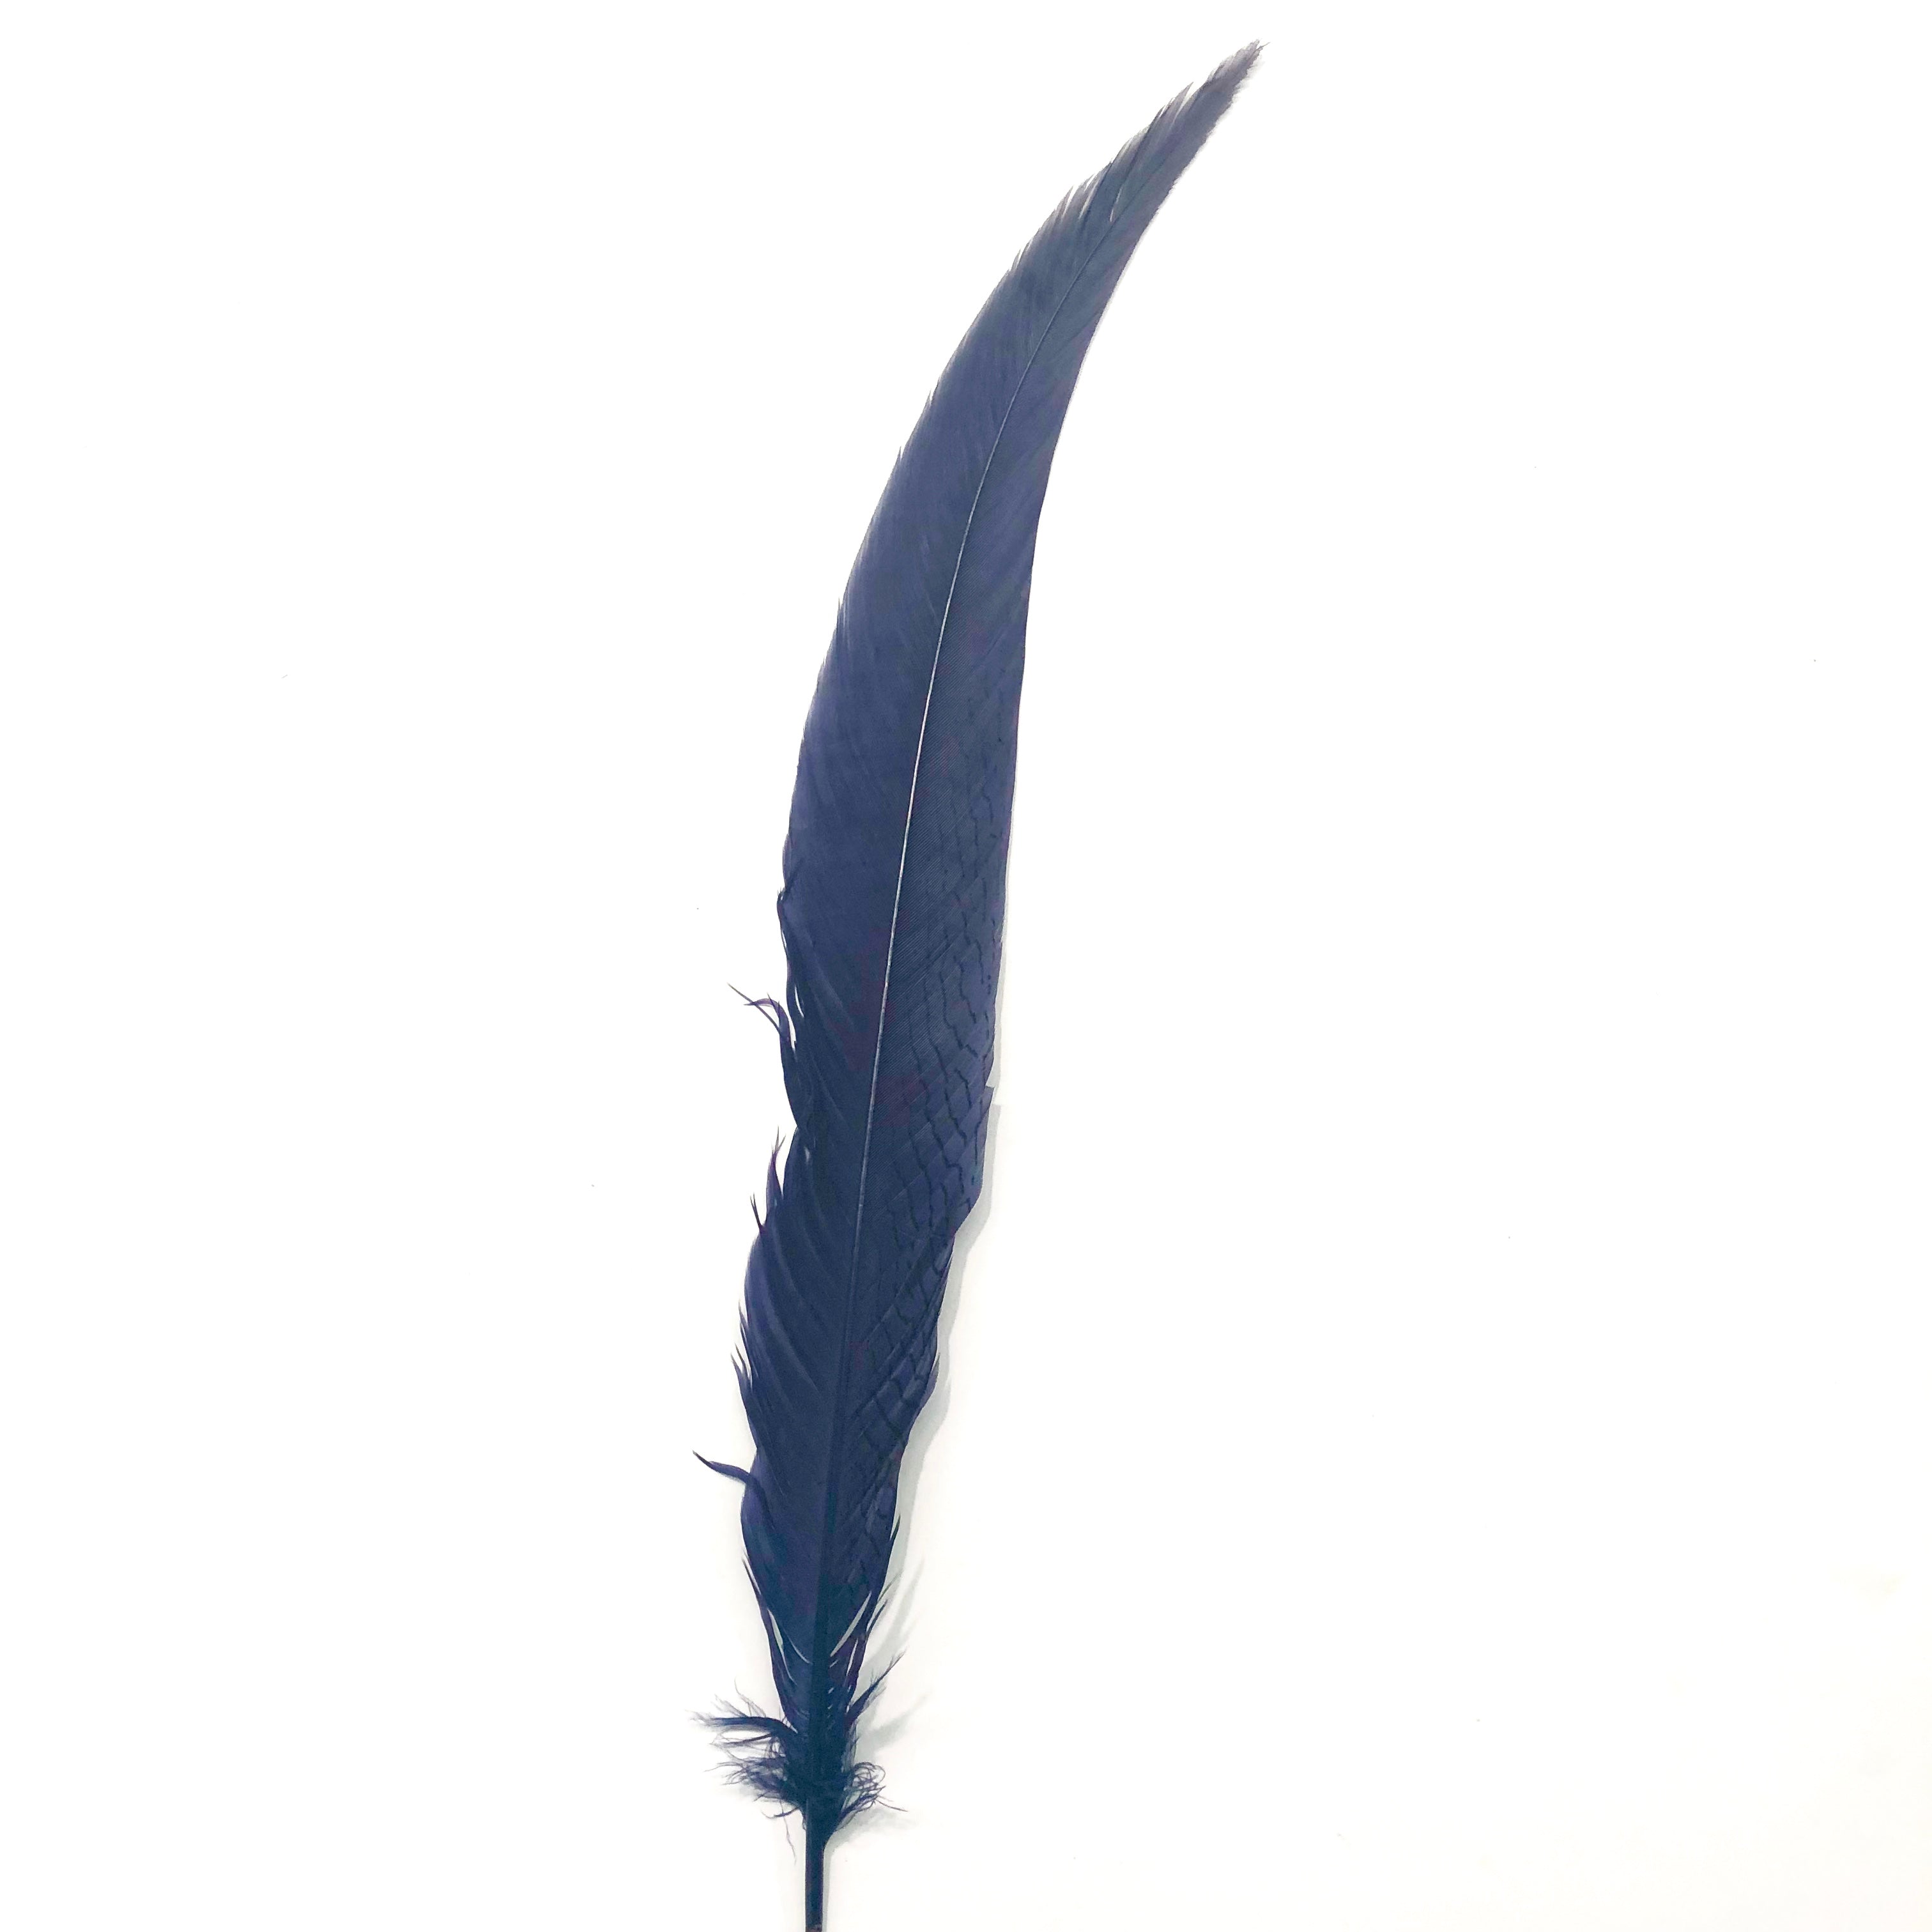 20" to 30" Silver Pheasant Tail Feather - Dusty Navy Blue